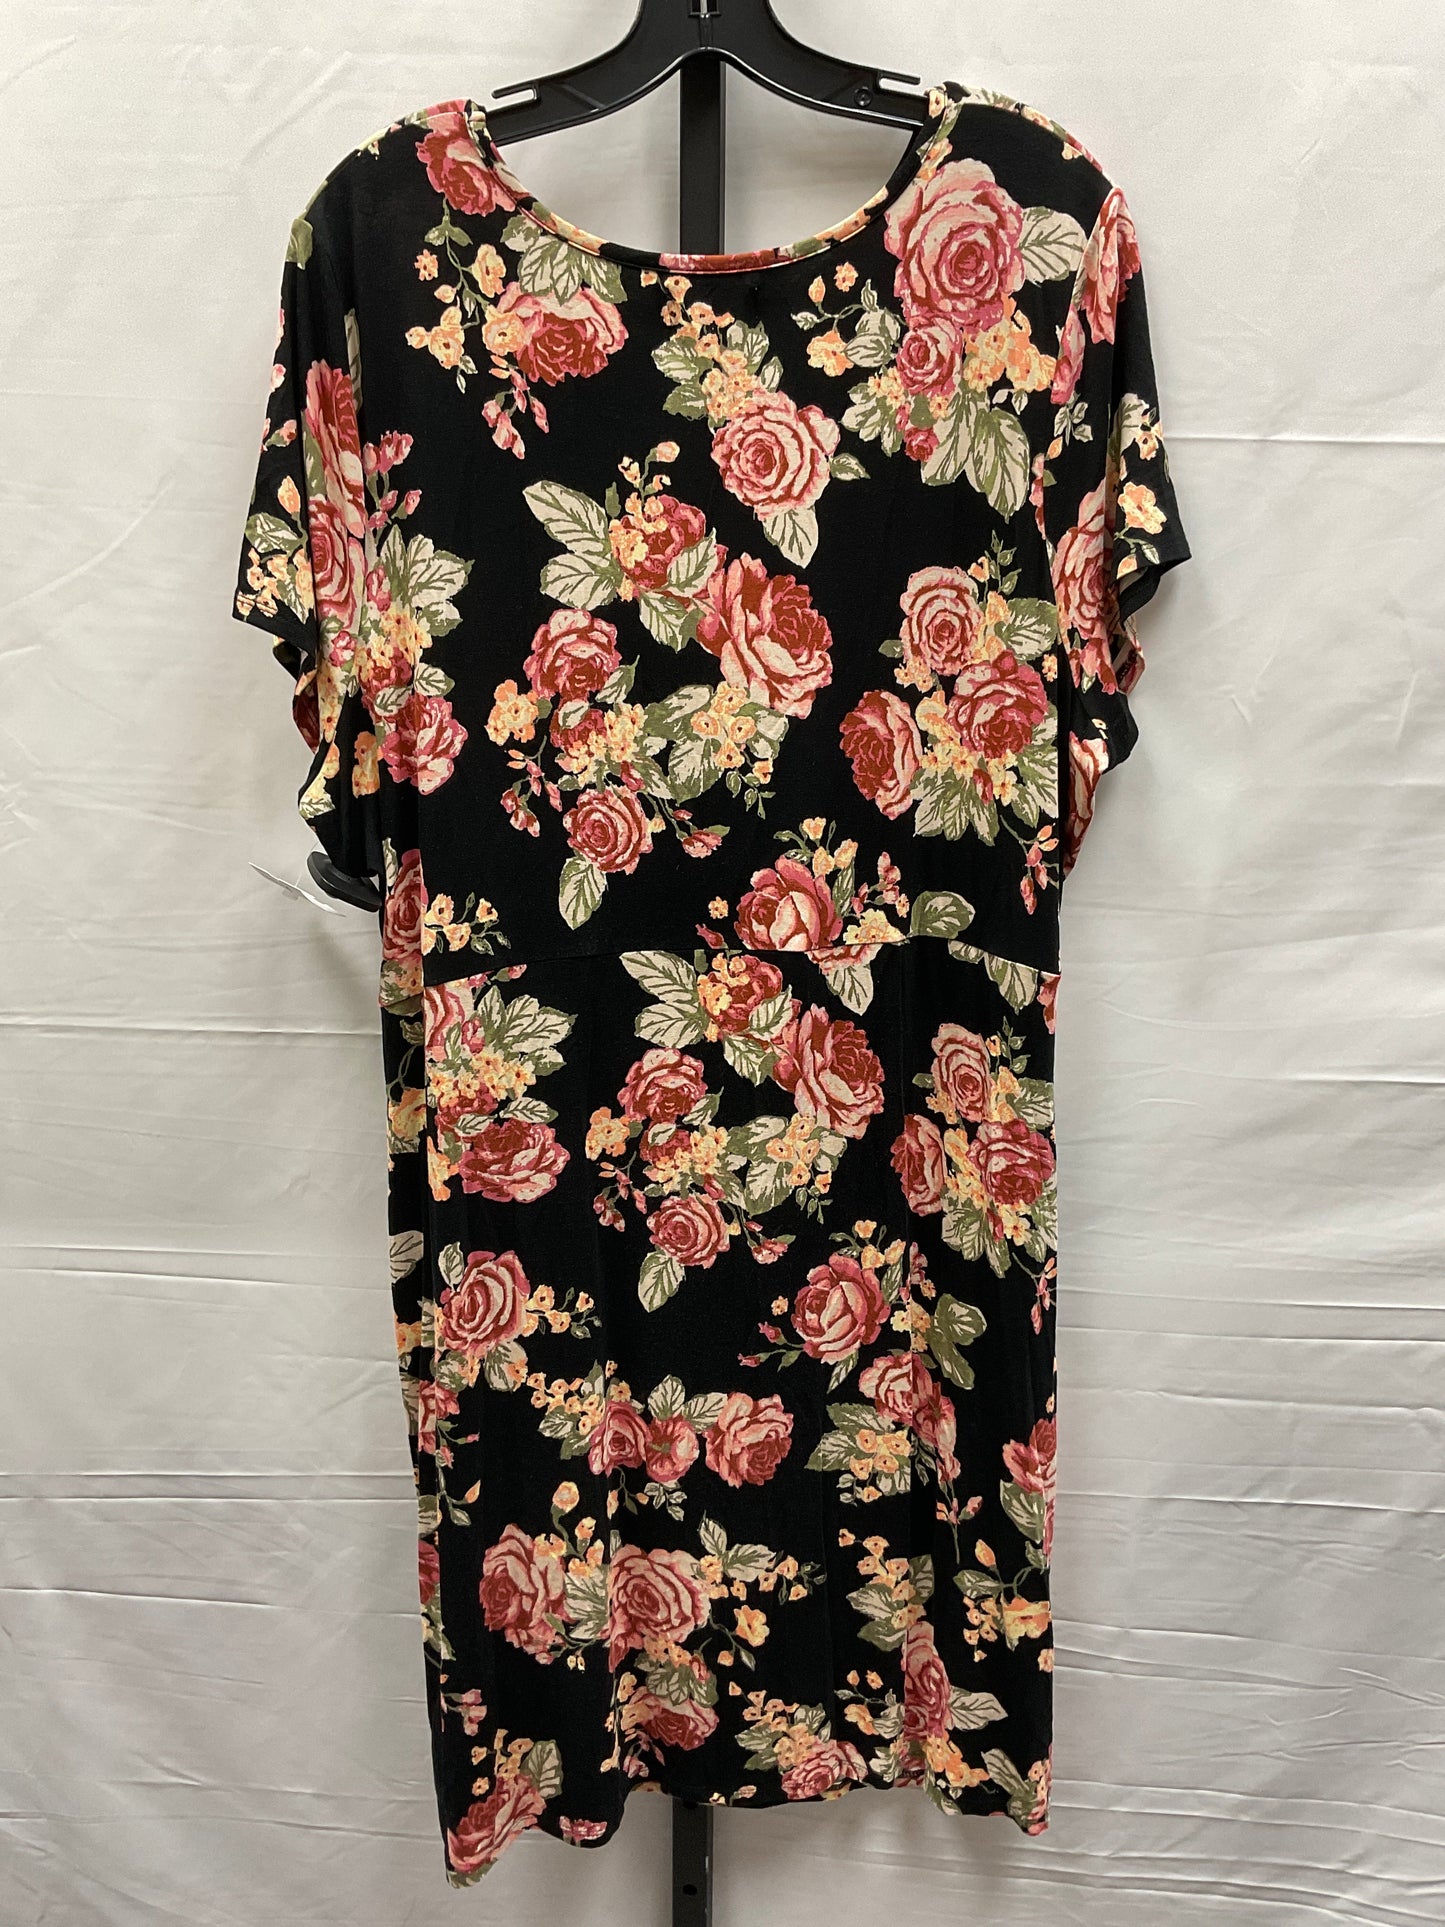 Floral Print Dress Casual Midi Maurices, Size 1x